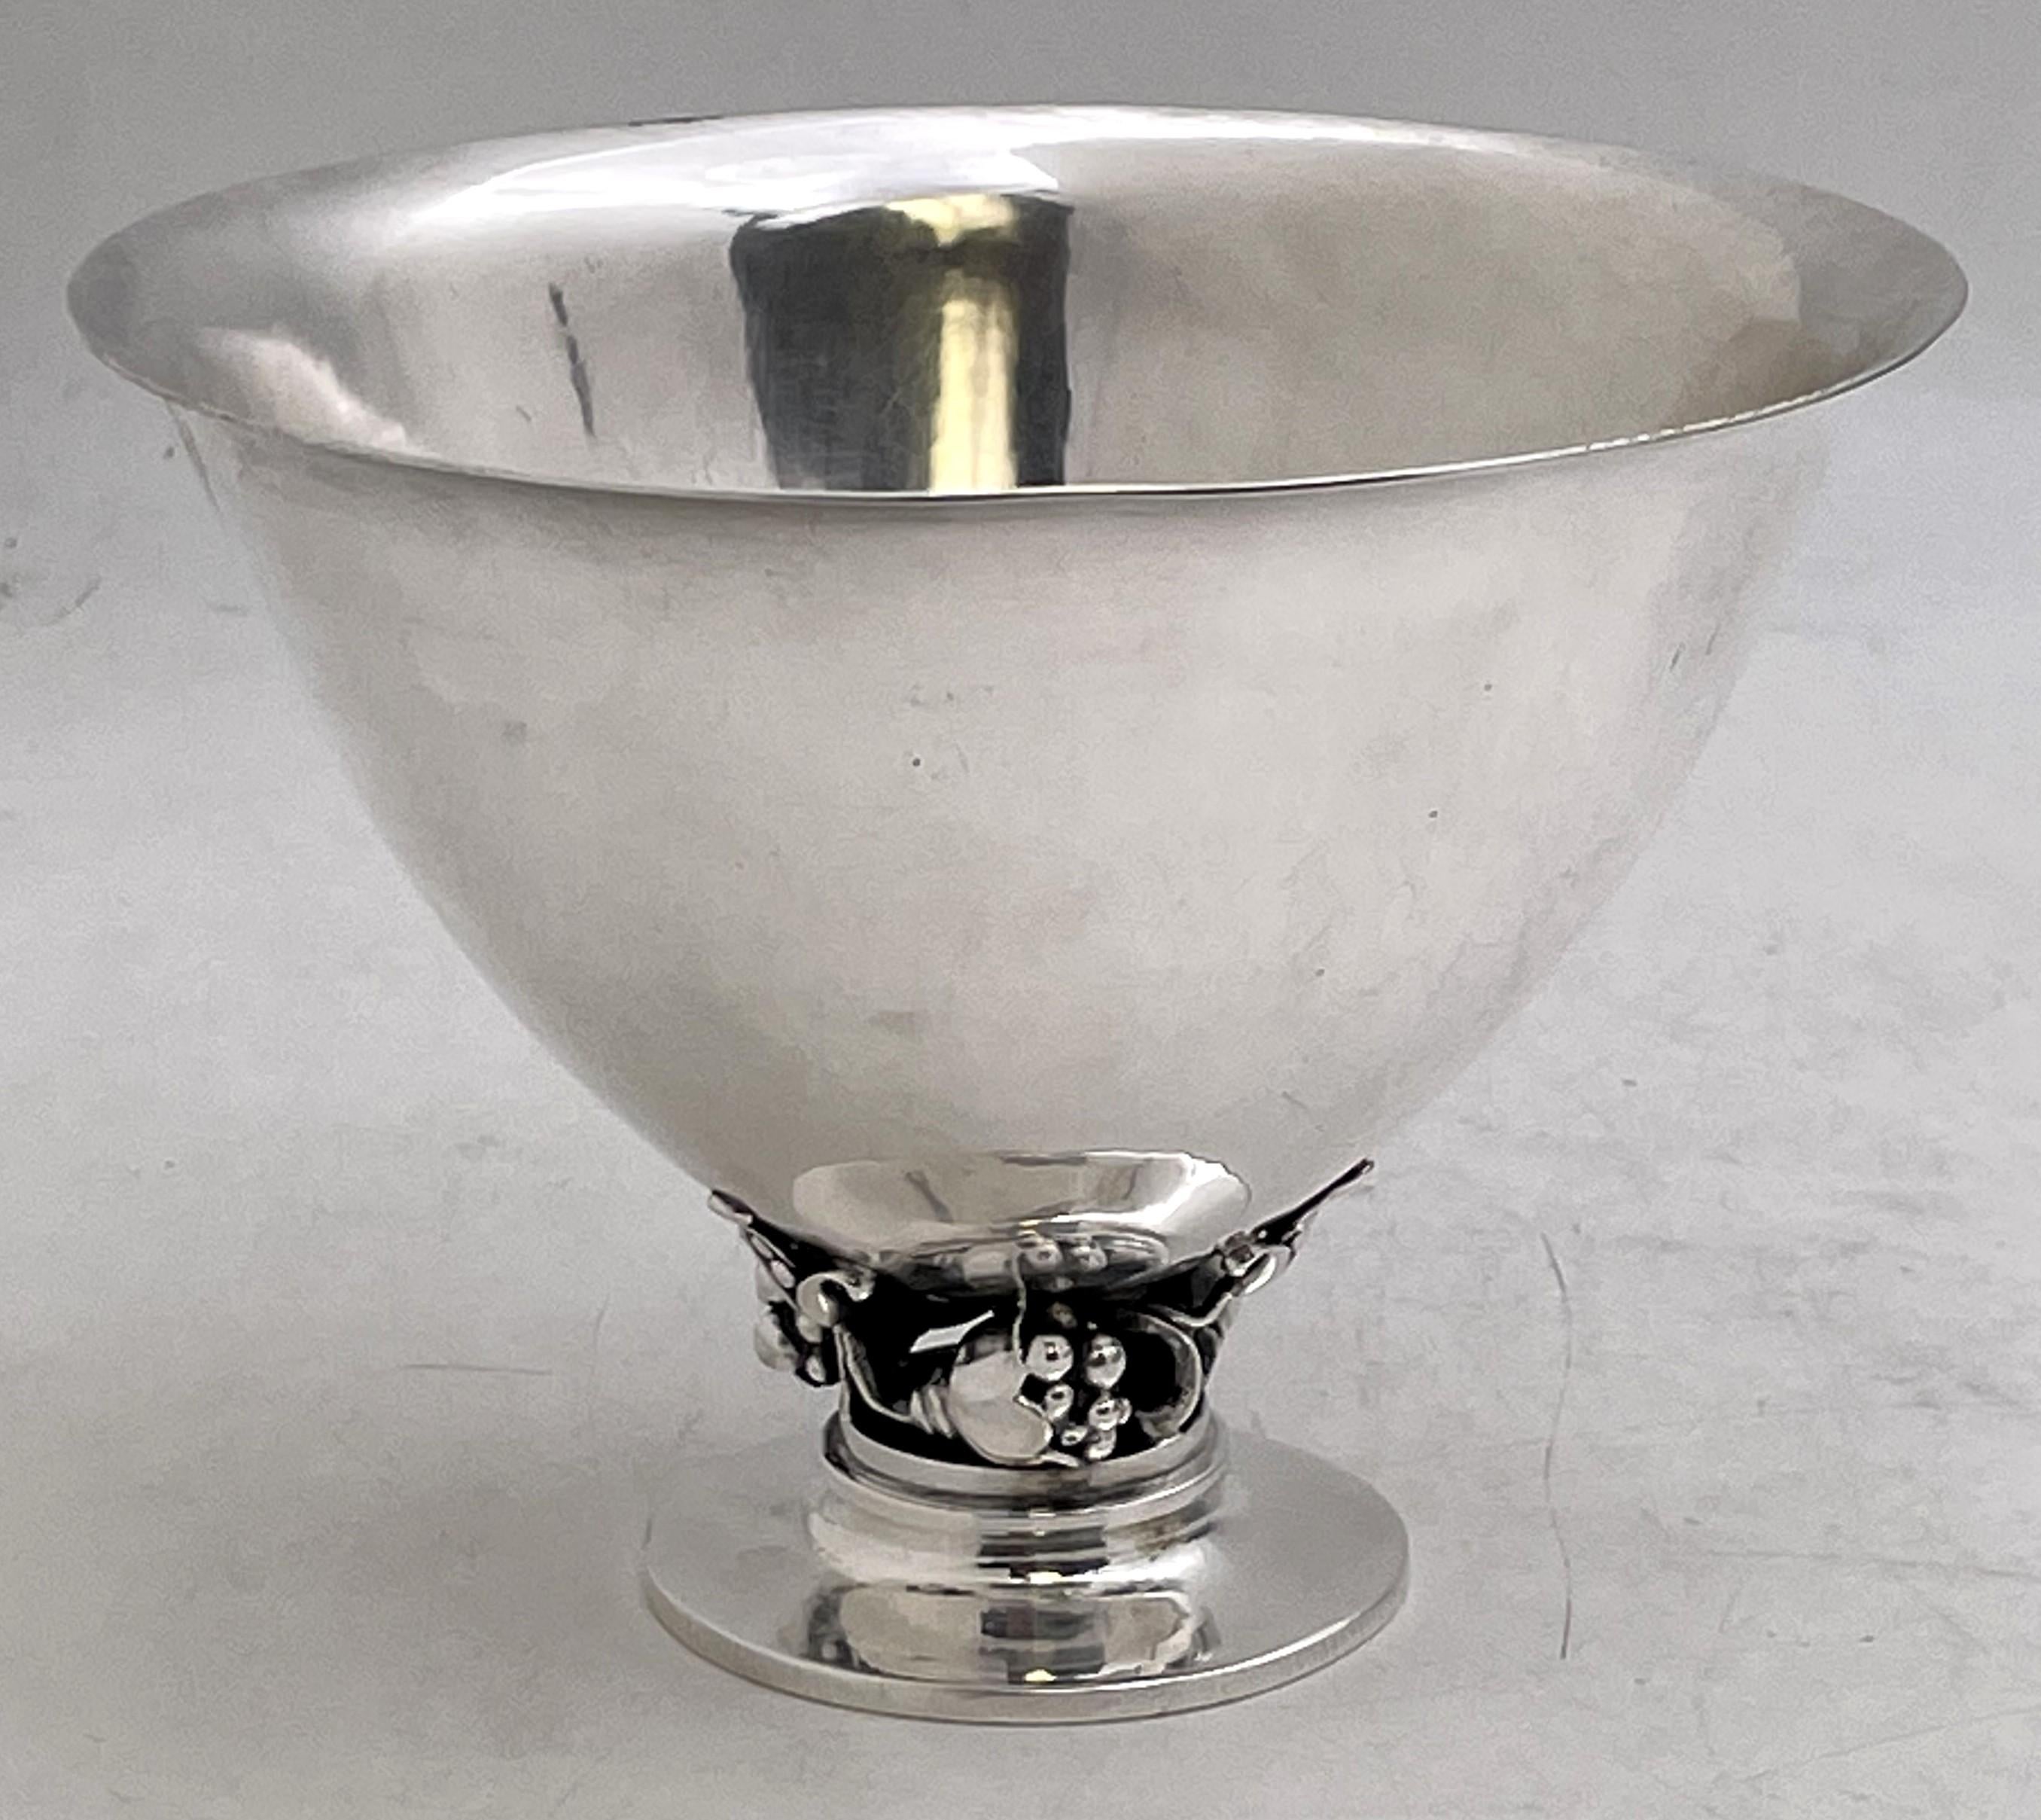 Georg Jensen sterling silver hand-hammered bowl, designed by Gundorph Albertus, in pattern number 778 and in Mid-Century Modern style, showcasing elegant floral and natural motifs at the base. It measures 5 3/4'' in diameter by 4 1/4'' in height,